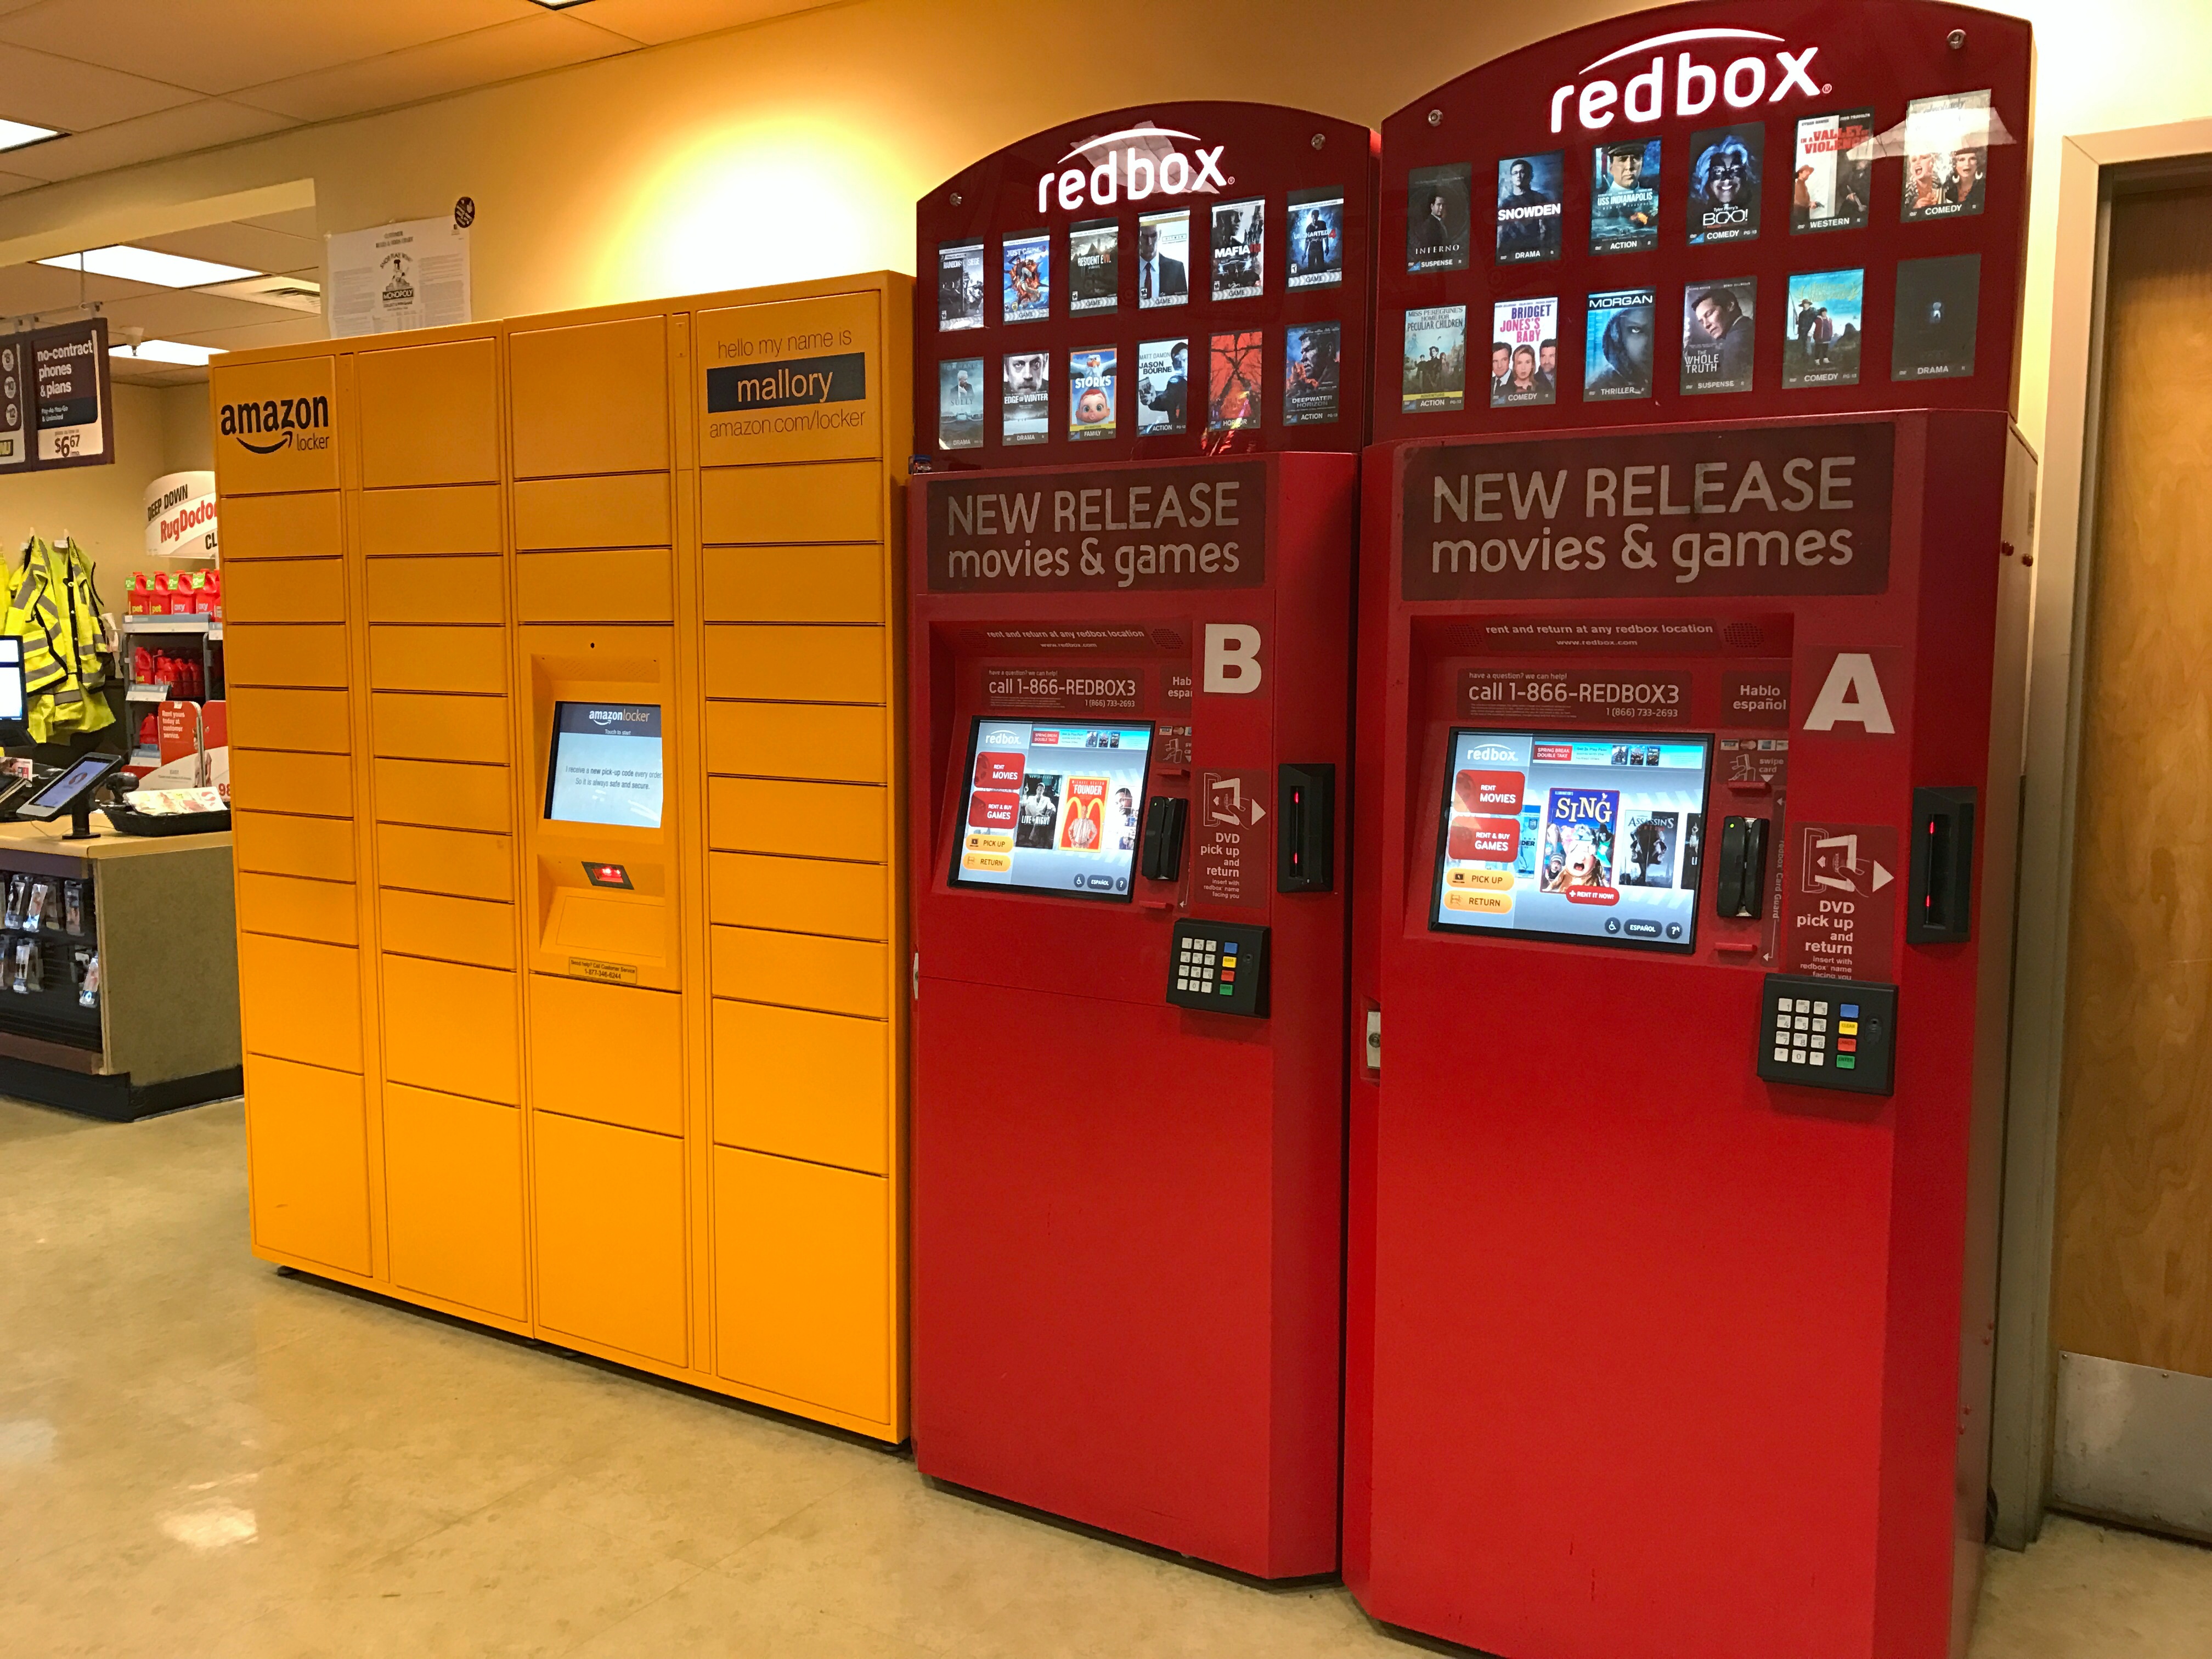 Detail view of Amazon lockers pick-up point for delivered packages